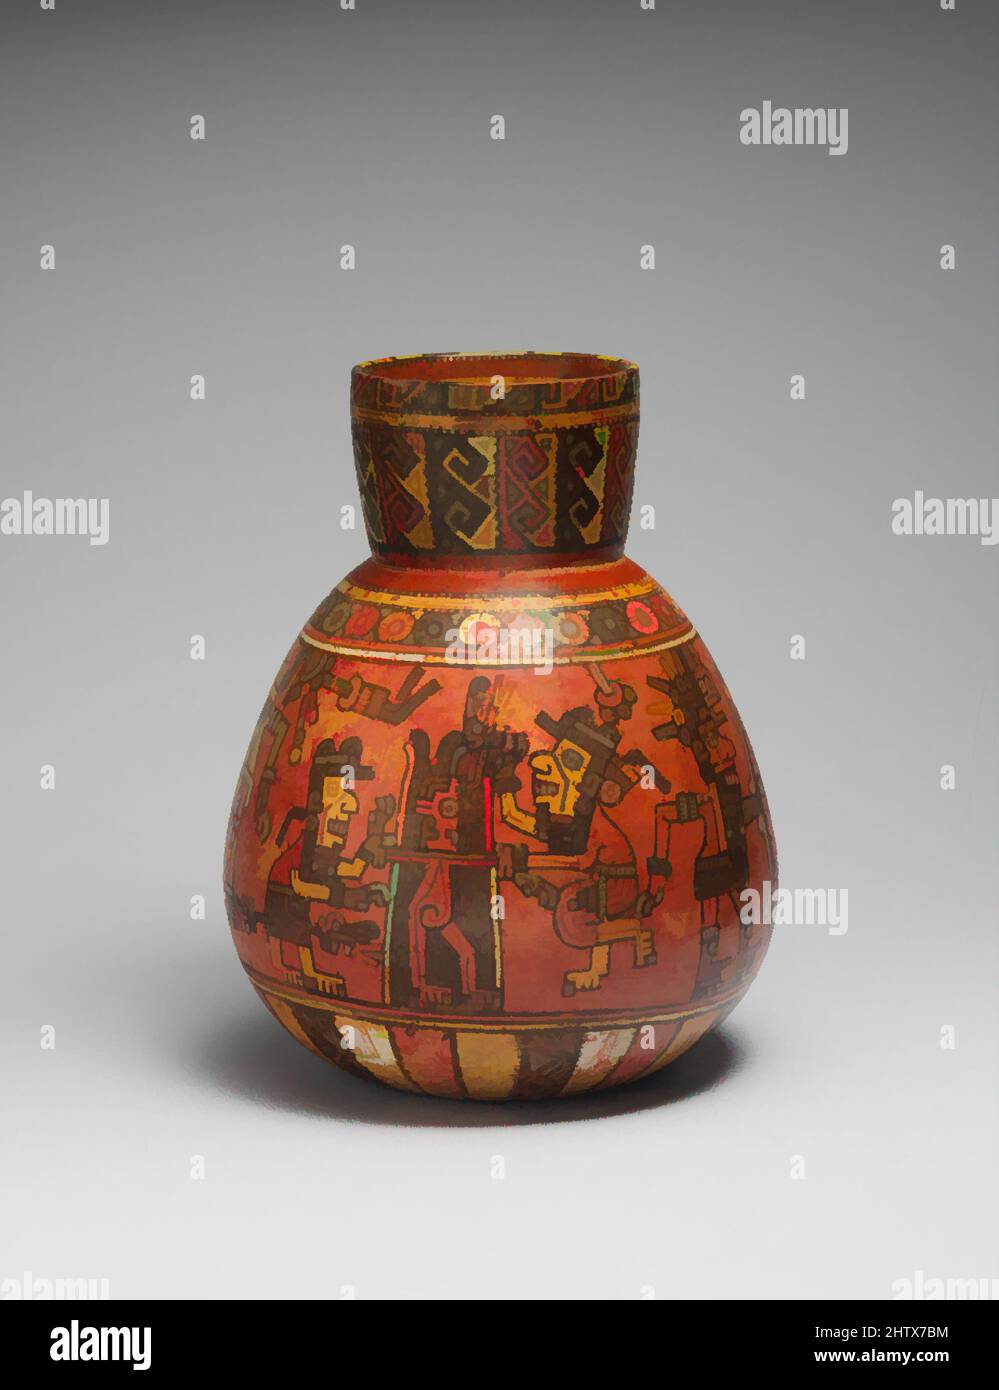 Art inspired by Jar with Ritual Scene, 1400–1500, Mexico, Mesoamerica, Nayarit, Ceramic, H. 10-1/2 x Diam. 7 3/4 in. (26.7 x 19.7 cm), Ceramics-Containers, During the last few centuries prior to the Spanish conquest, ceremonial vessels in Mexico had simple forms with large surfaces to, Classic works modernized by Artotop with a splash of modernity. Shapes, color and value, eye-catching visual impact on art. Emotions through freedom of artworks in a contemporary way. A timeless message pursuing a wildly creative new direction. Artists turning to the digital medium and creating the Artotop NFT Stock Photo